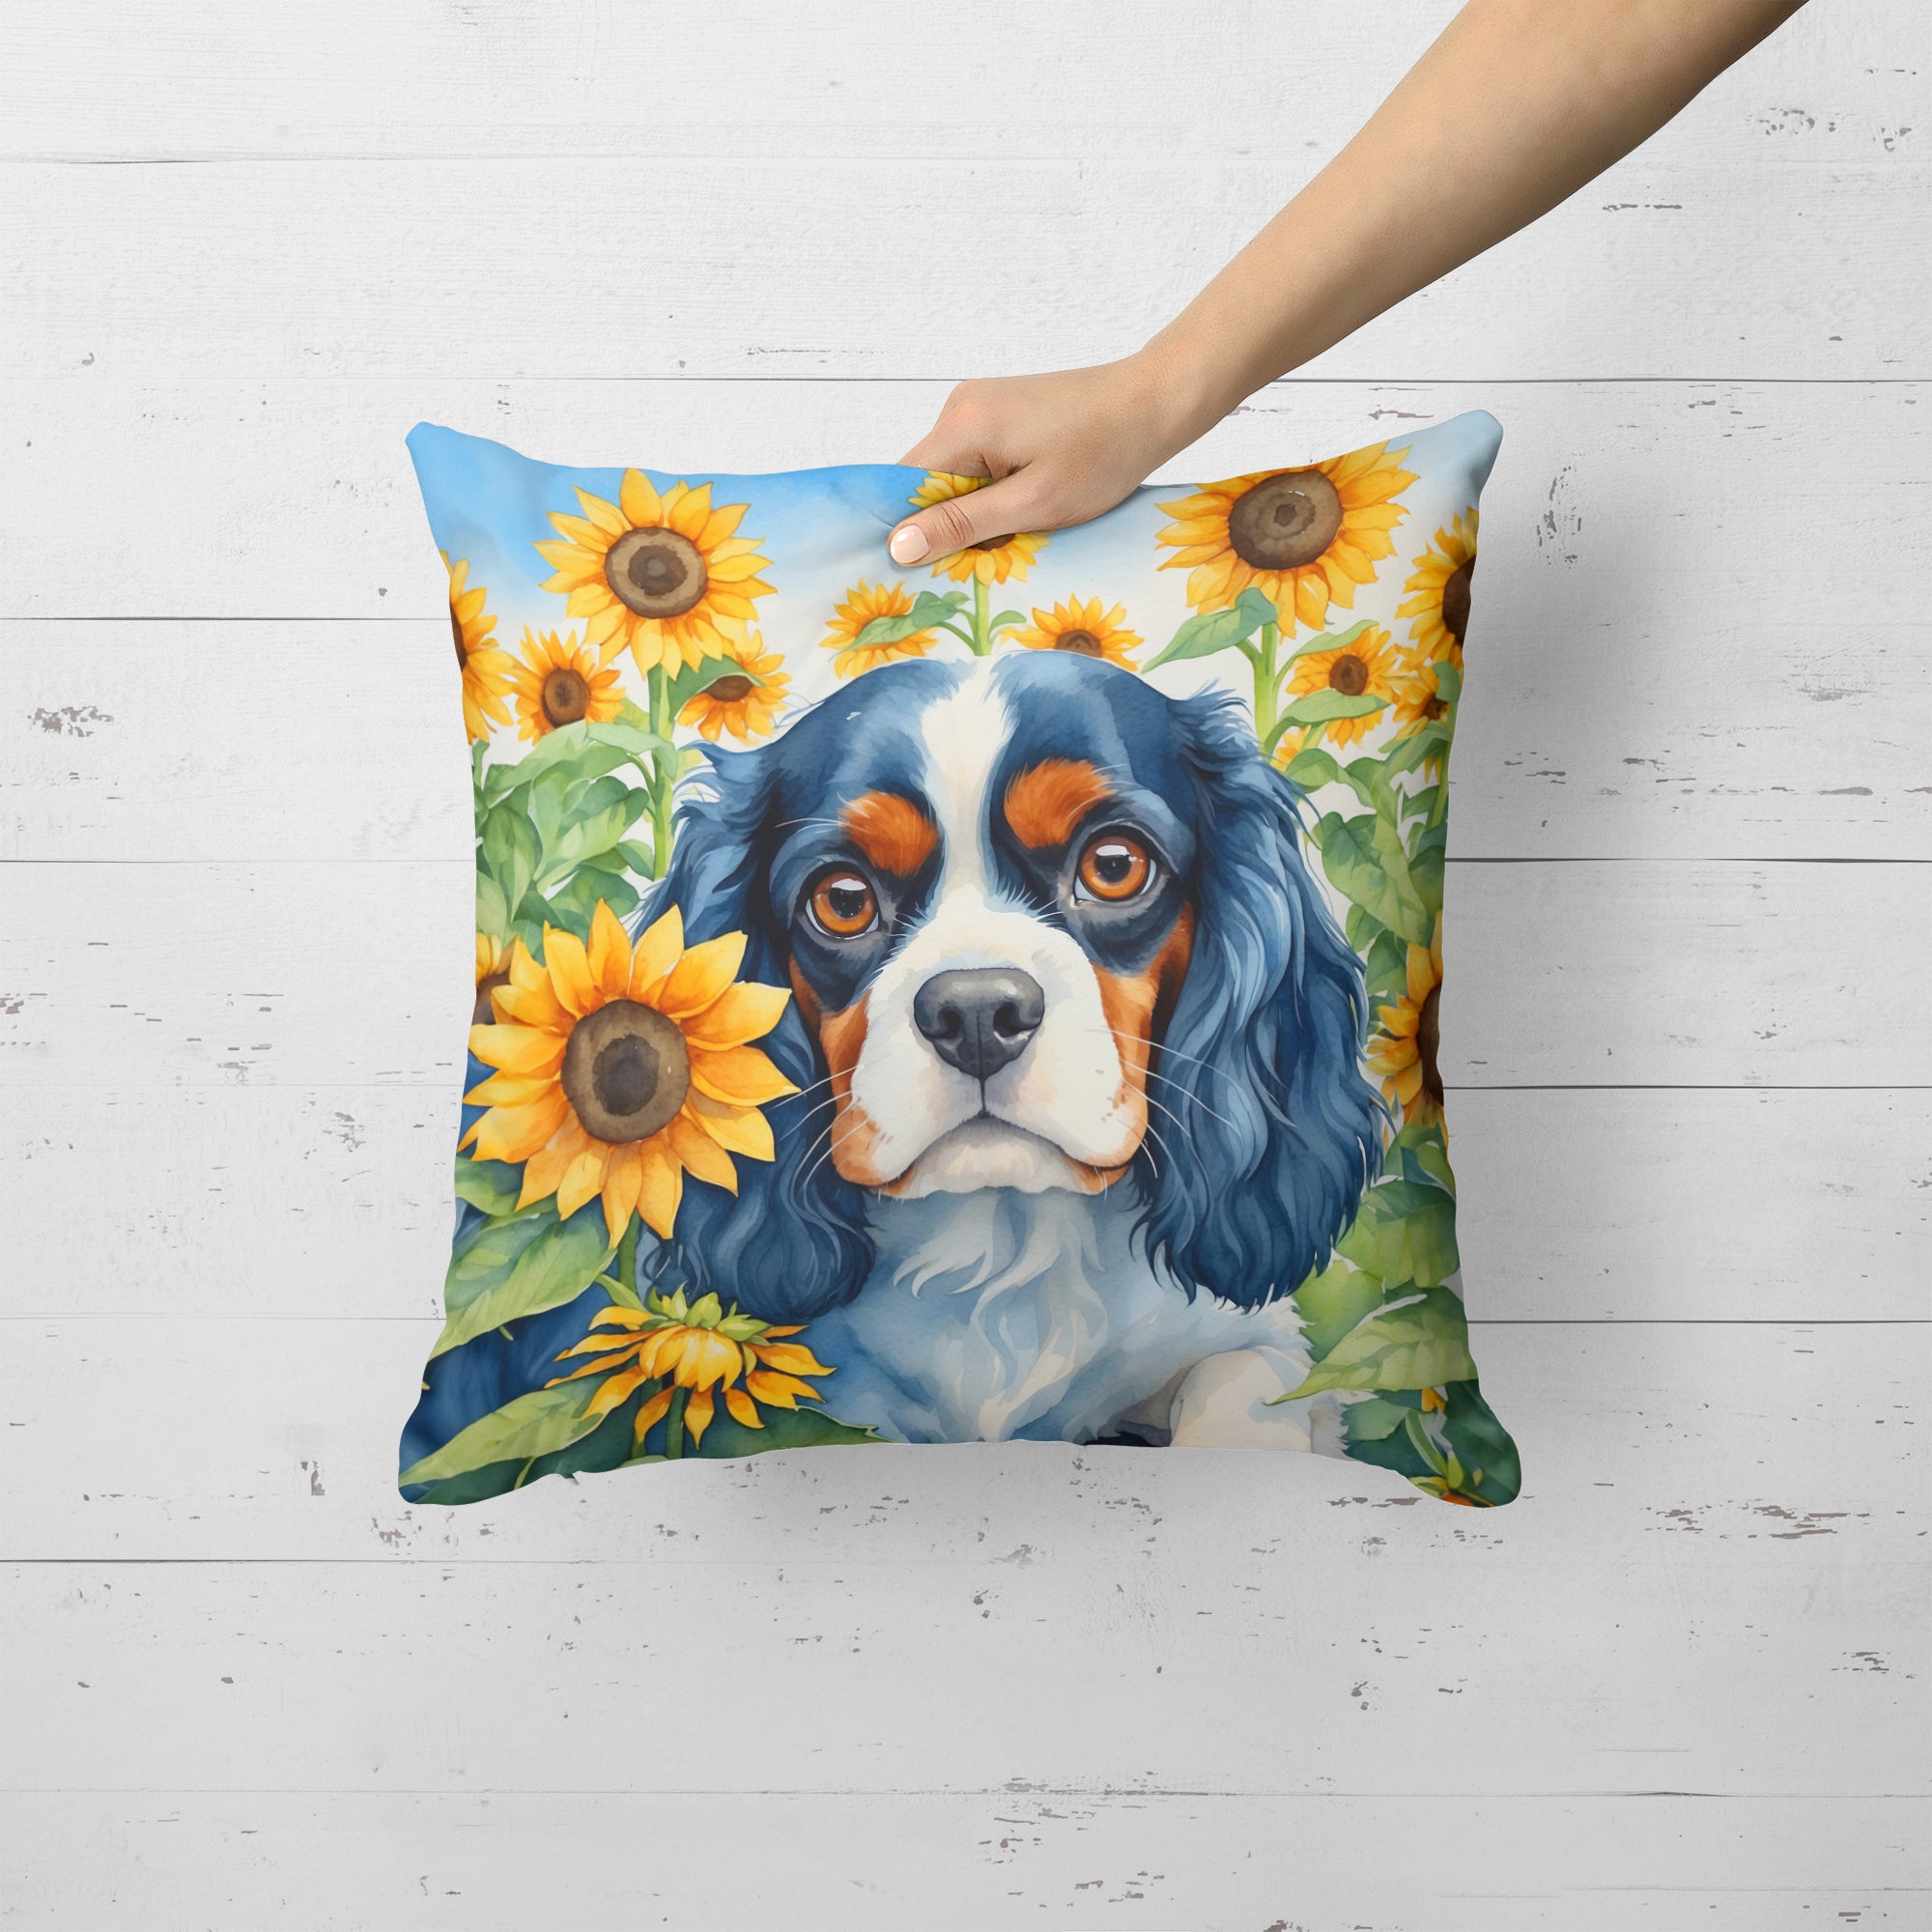 Buy this Cavalier Spaniel in Sunflowers Throw Pillow